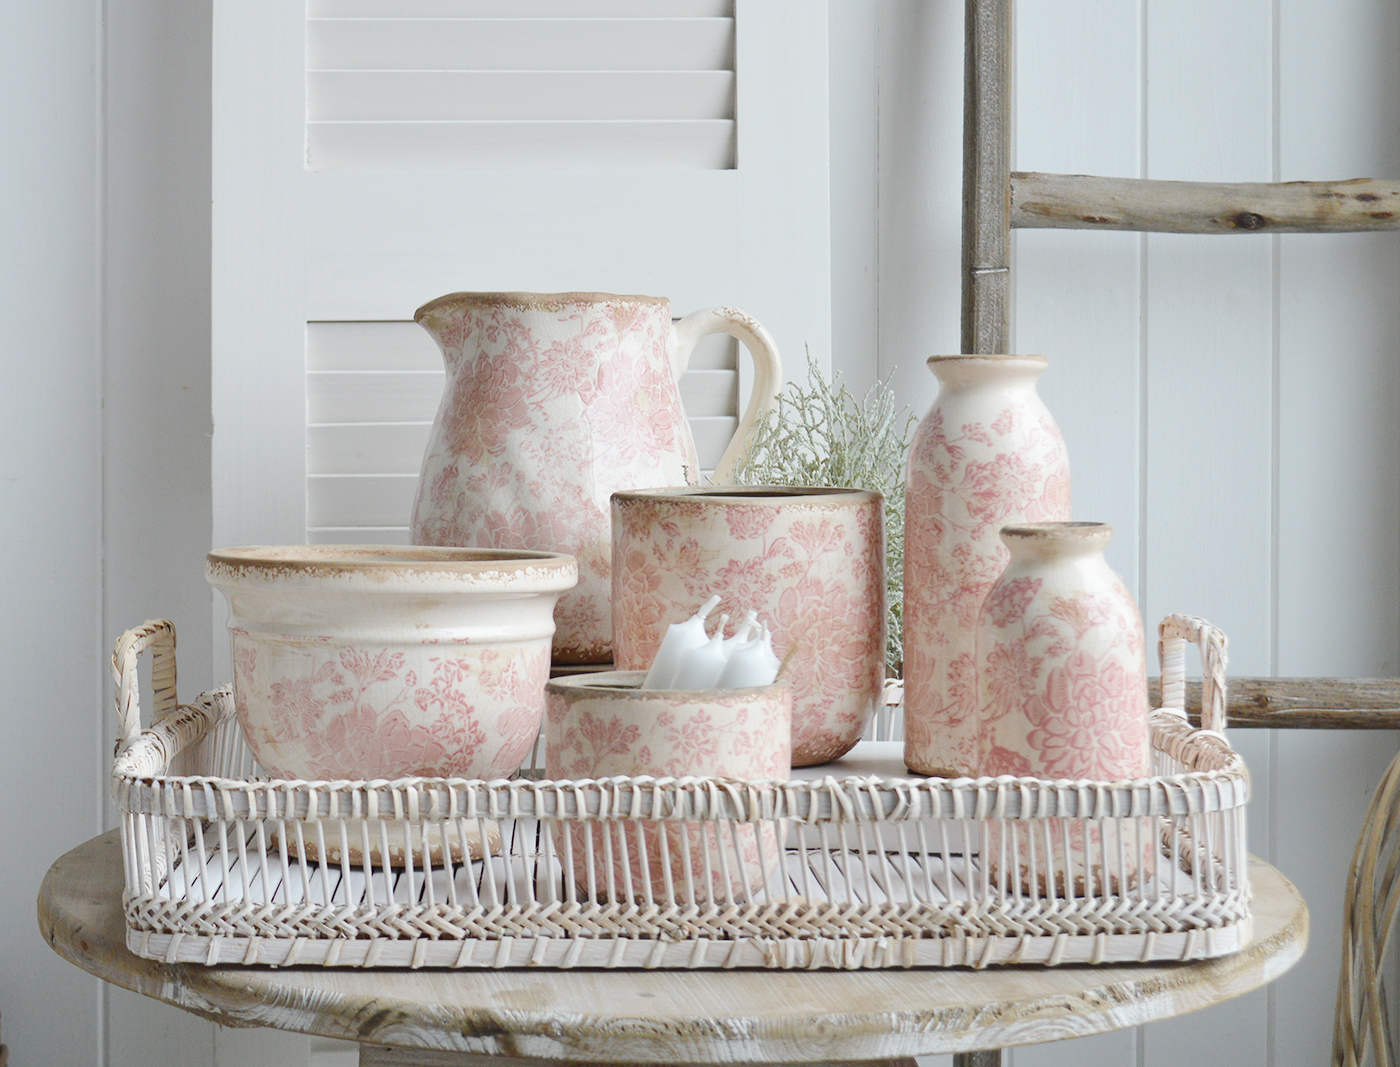 Tolland vintage pink ceramics for New England, farmhouse,  Country and coastal homes and interior decor to complement New England furniture